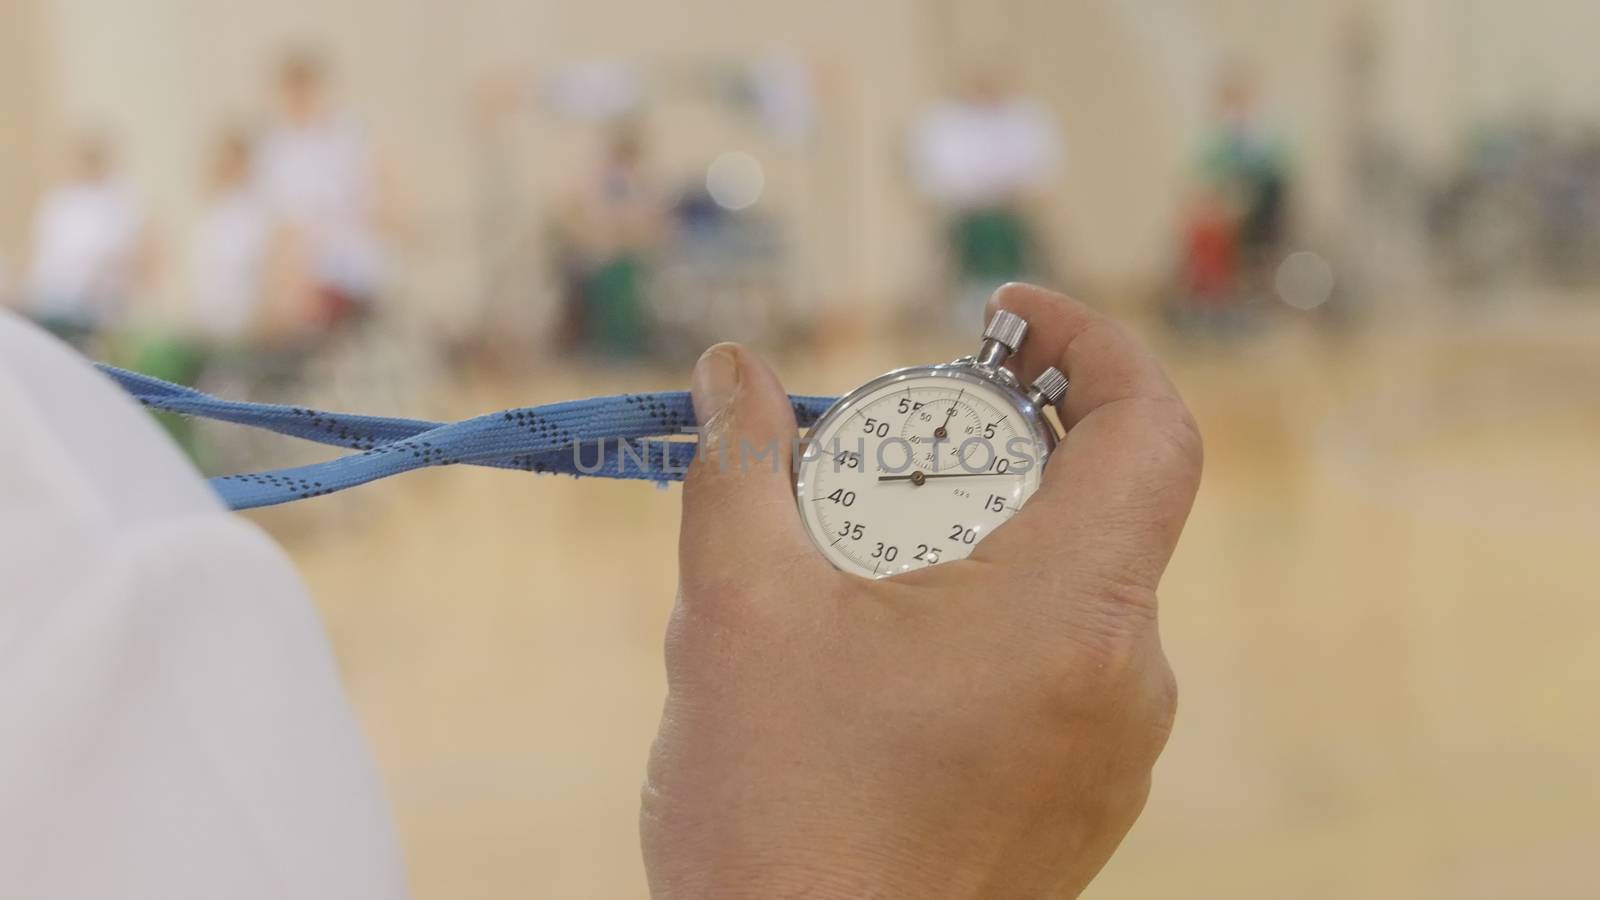 Stopwatch in hand of coach during training for wheelchair basketball, close up